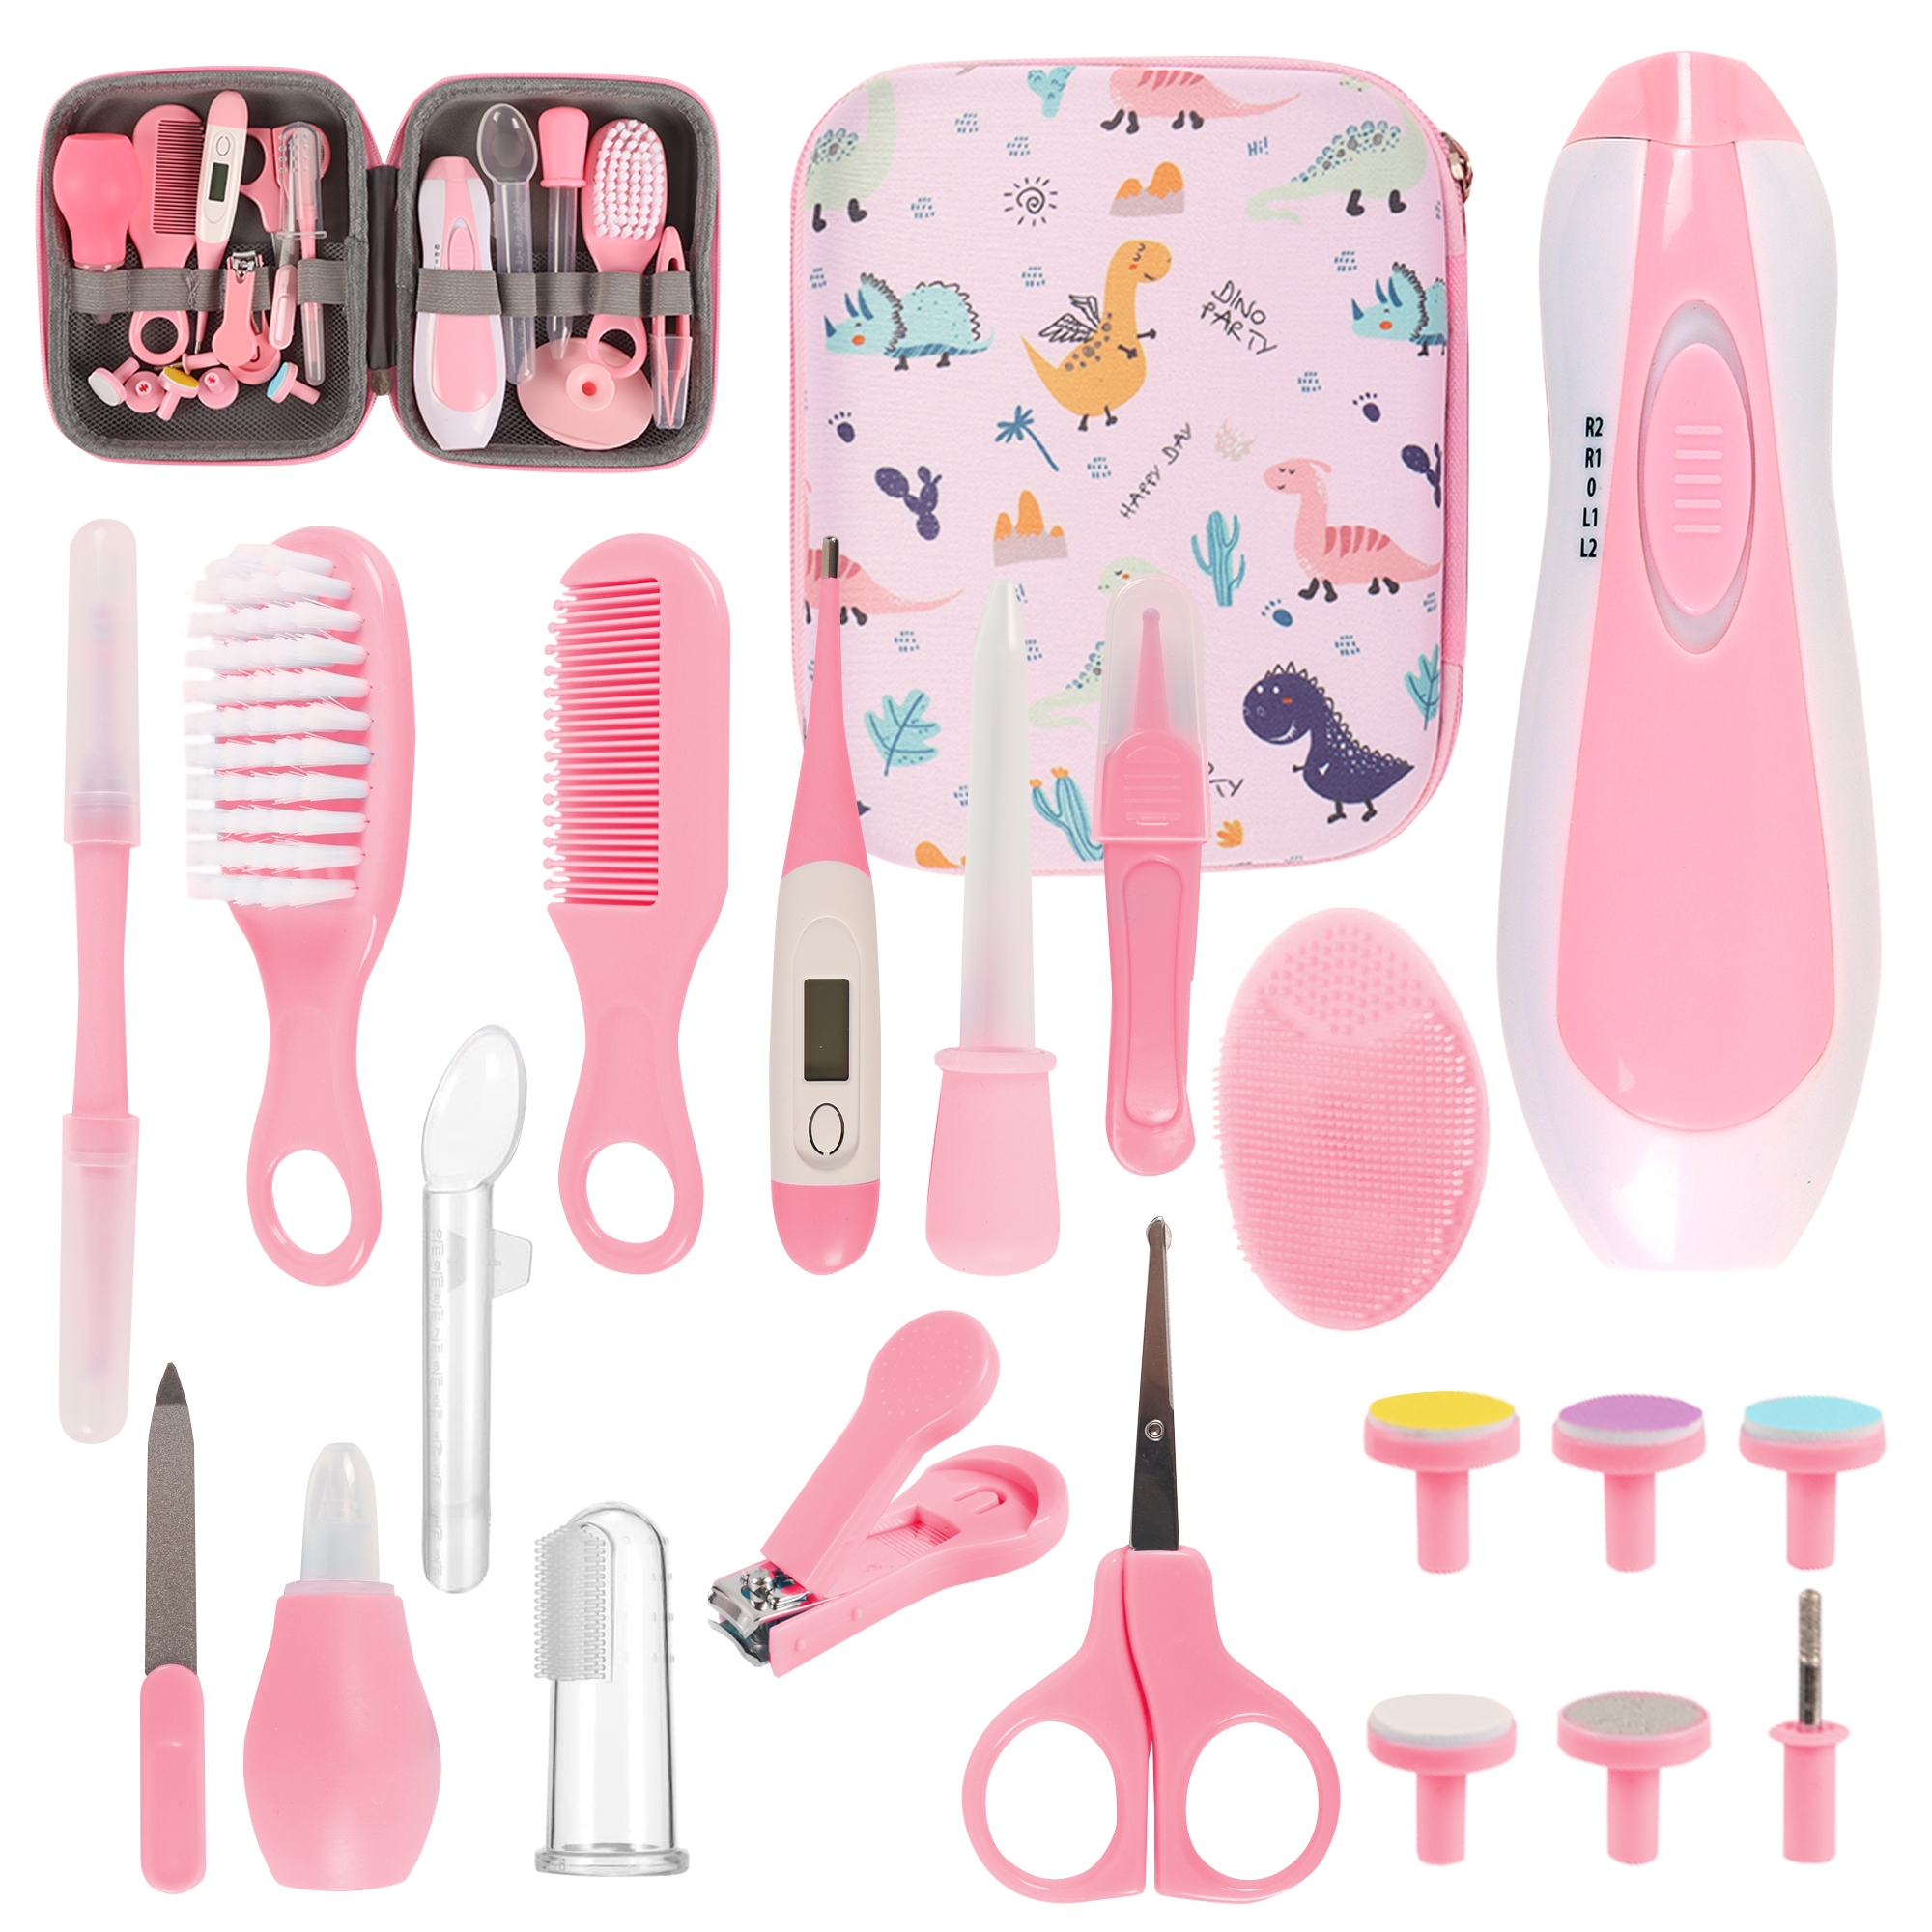 Baby Healthcare and Grooming Kit,20 in 1 Electric Safety Nail Trimmer Baby Nursery Set Newborn Nursery Health Care Set with Hair Brush Comb for Infant Toddlers Kids Baby Shower Gifts-Pink - image 1 of 7